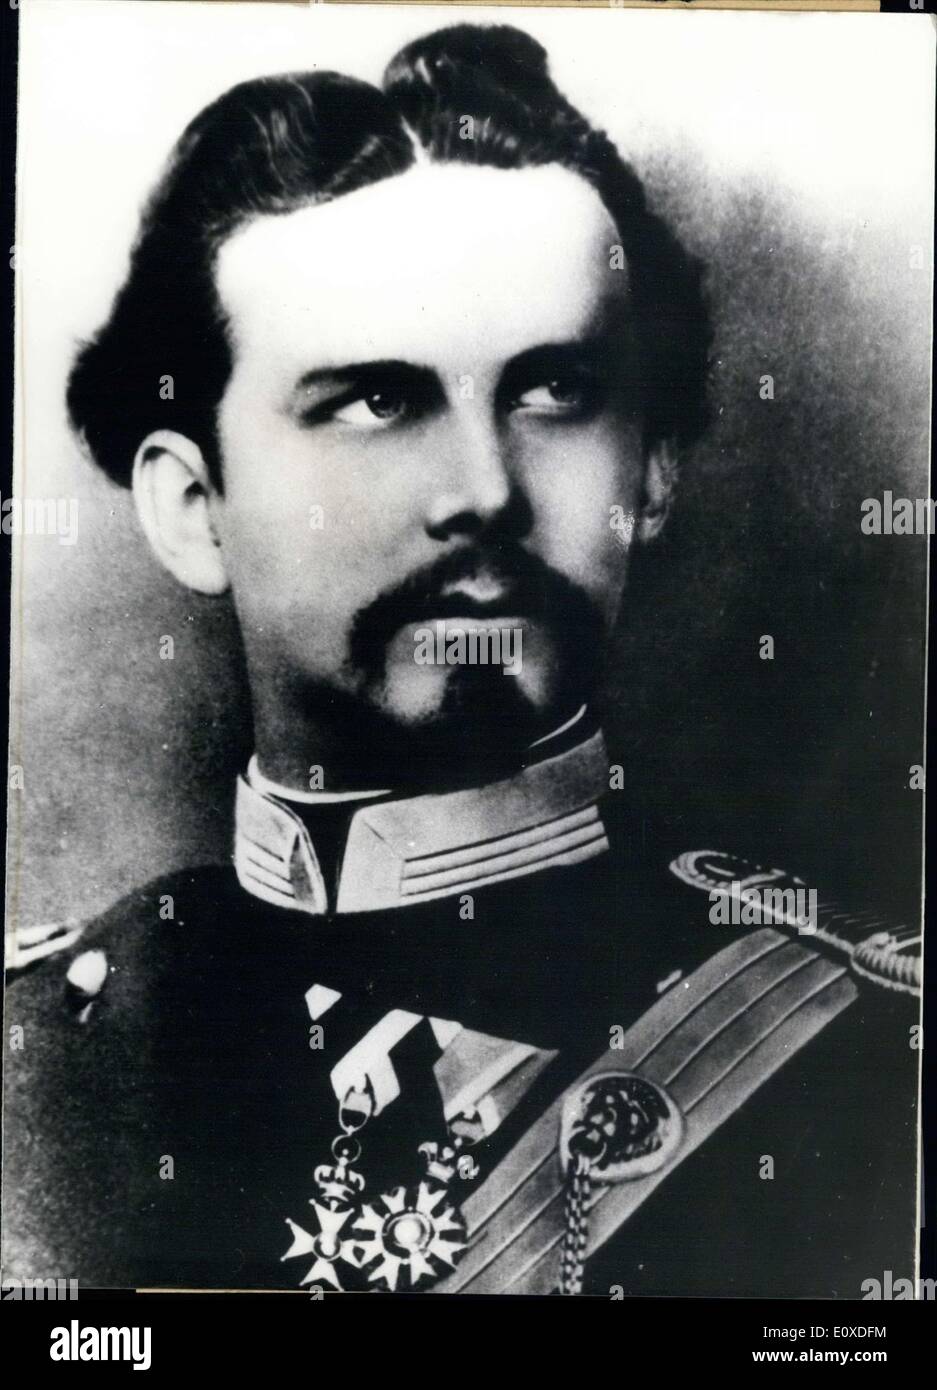 Jun. 07, 1966 - This picture was printed in observance of the 80th anniversary of the death of King Ludwig II von Bayern. He was found dead in Starnberg Sea. He was responsible for building Herrenchiemsee, Neuschwanstein, and Linderhof. He was also a good friend of Richard Wagner. He was also mentally deranged. He drowned in the sea. Stock Photo